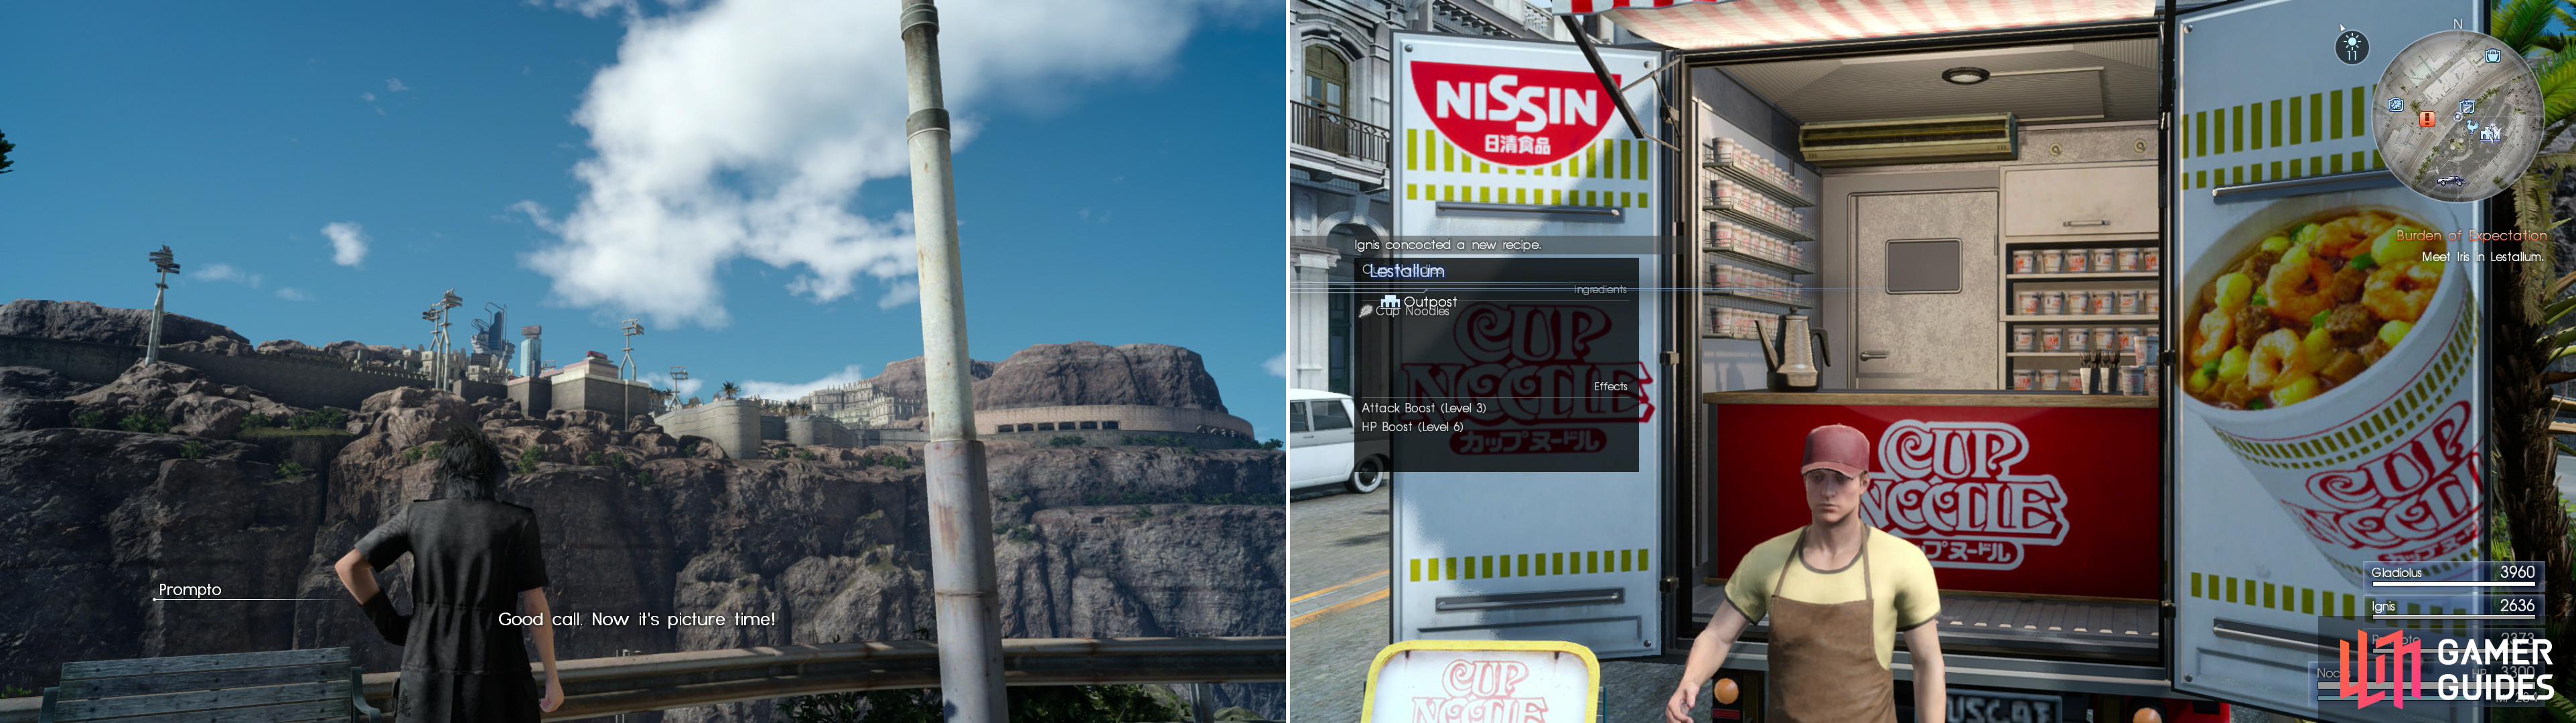 On the way to Lestallum, Prompto might just bug you to take advantage of a photo op (left). Near where you park you’ll find a Cup of Noodles… Nissin must have paid good money for so much blatant promotion (right).